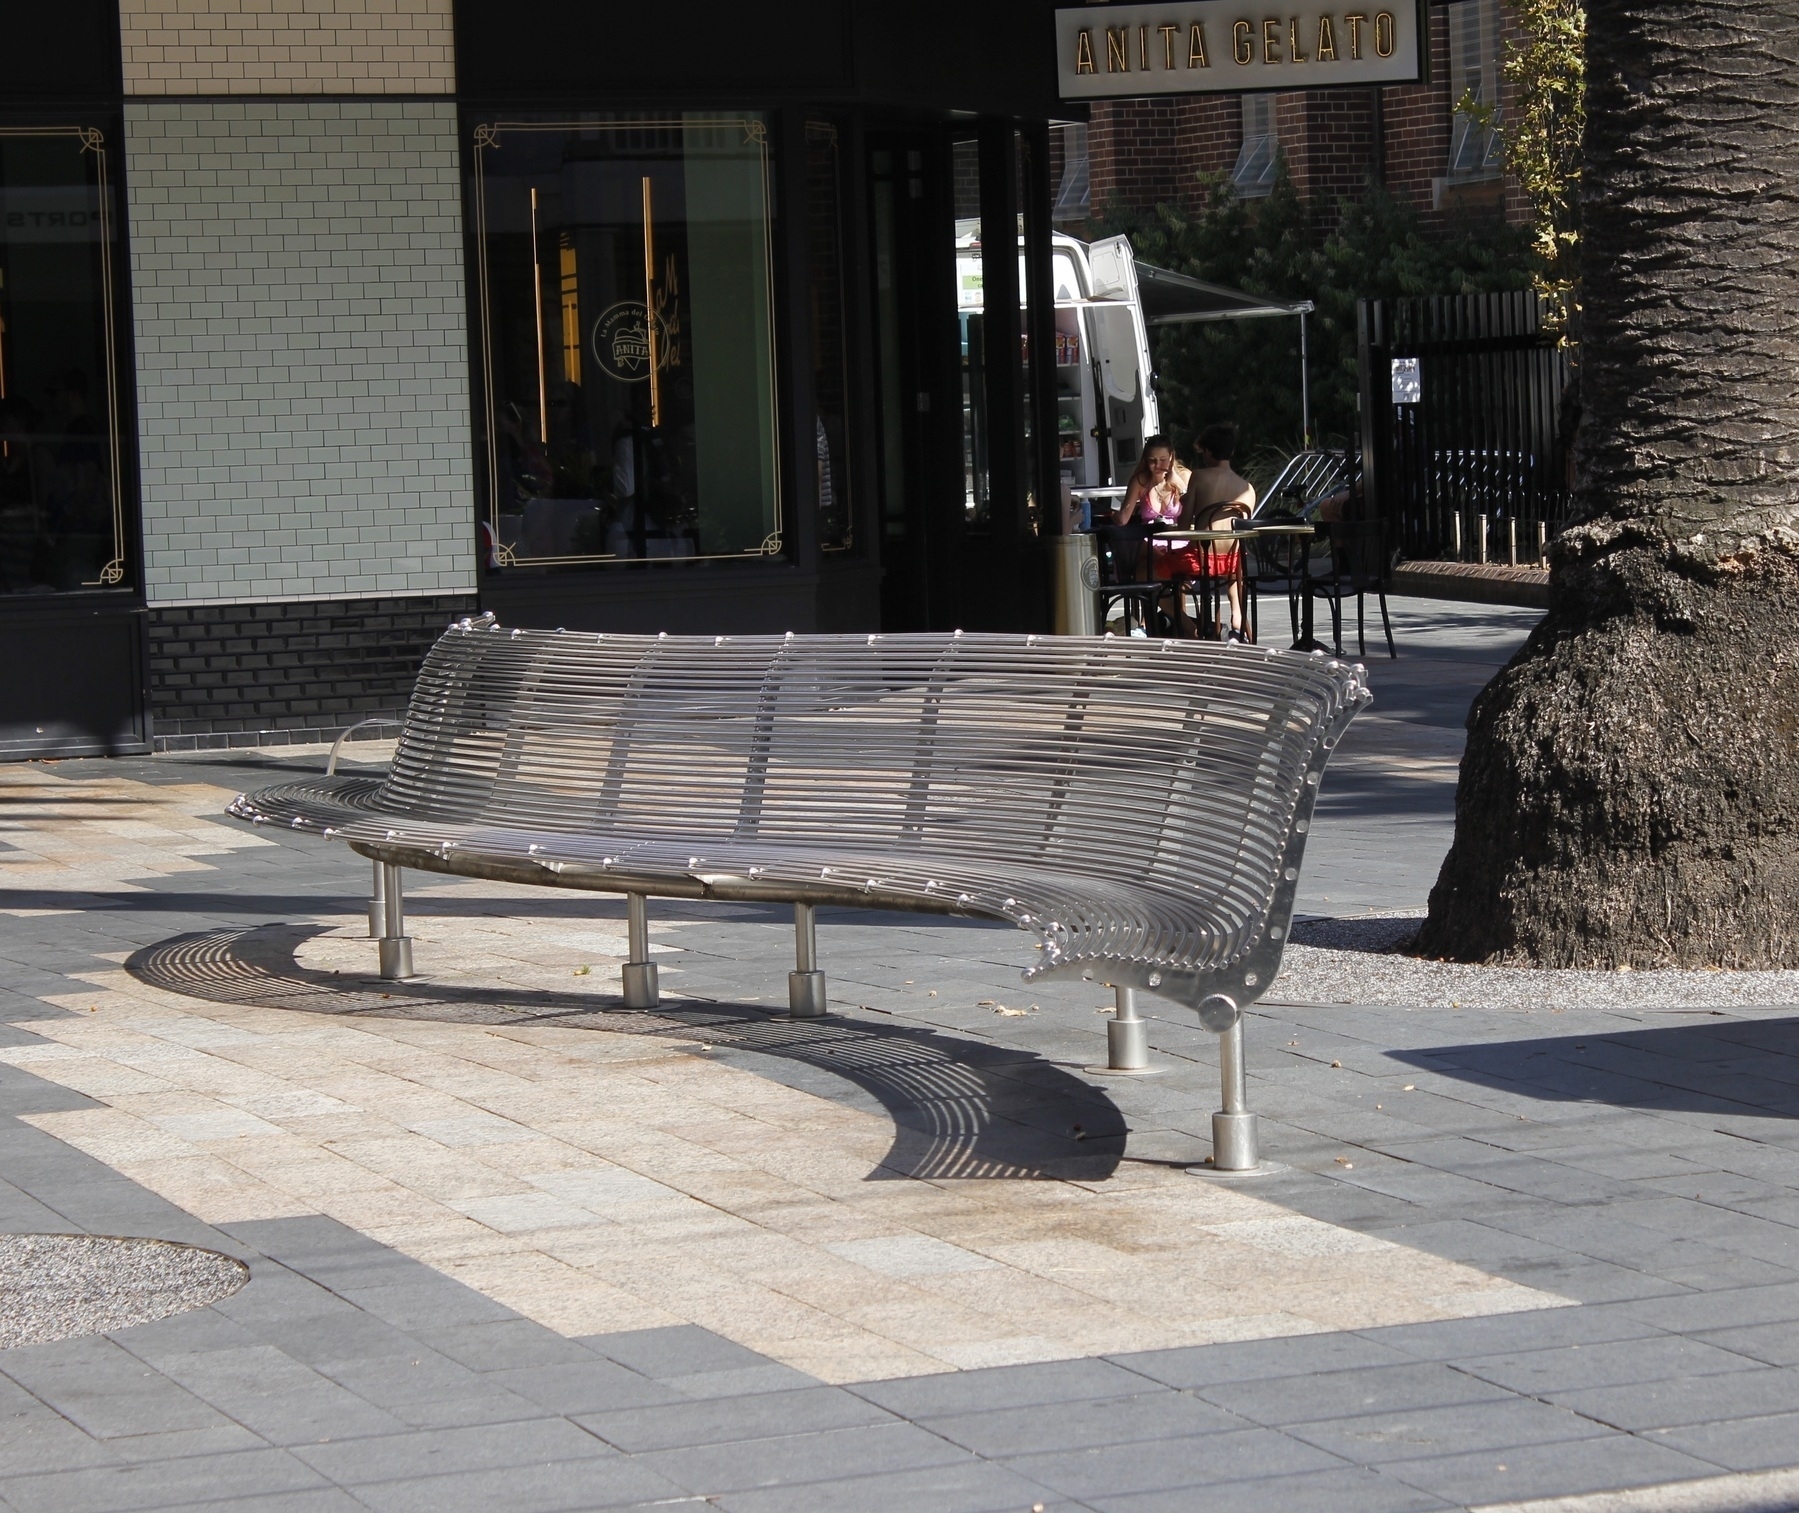 A steel-coloured metal bench stands on six steel legs, on a sunlit, tiled footpath in the foreground. The bench curves at the ends, in opposite directions, so that its shadow on the footpath forms a swirling, elongated letter 'S', in shadow lines due to the many narrow, horizontal plates that form the back and base of the bench. A palm tree stands behind the bench. In the background, in deep shadow, is a shopfront with a sign saying 'Anita Gelato', and two people at a table outside.